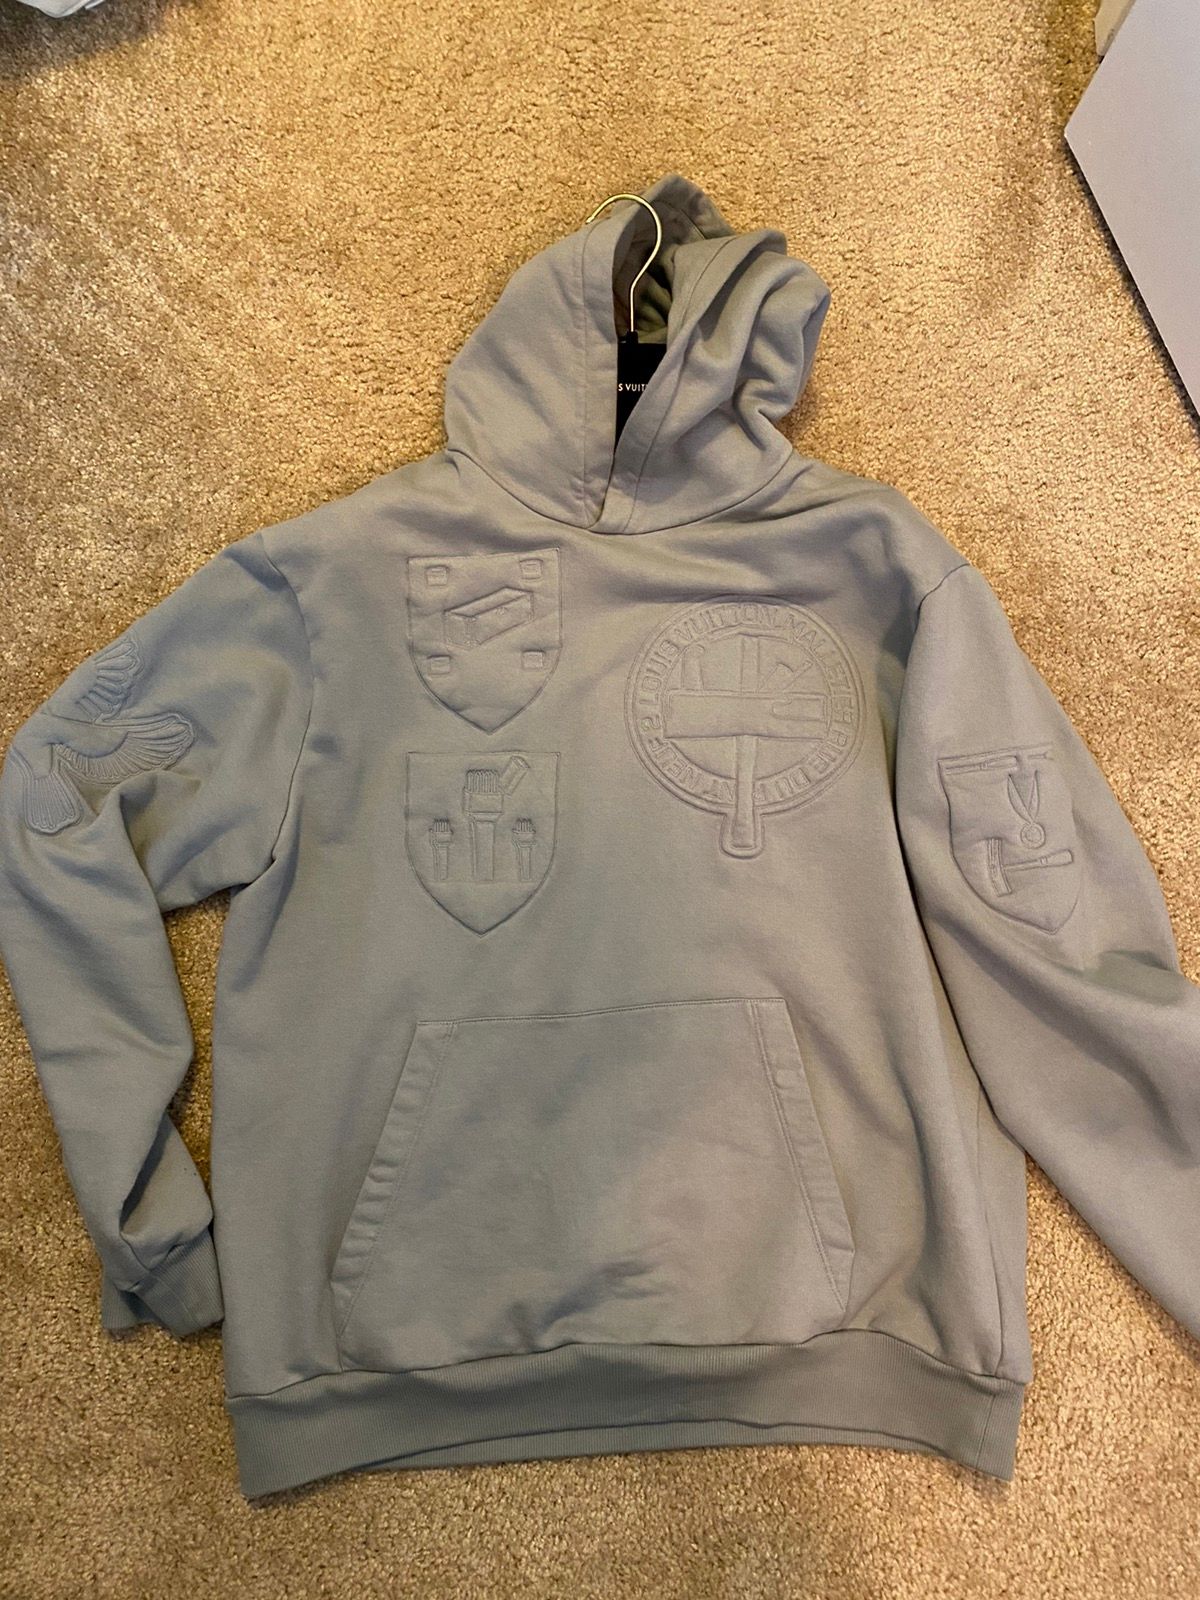 Louis Vuitton 3D Embroidered Hoodie Virgil Abloh